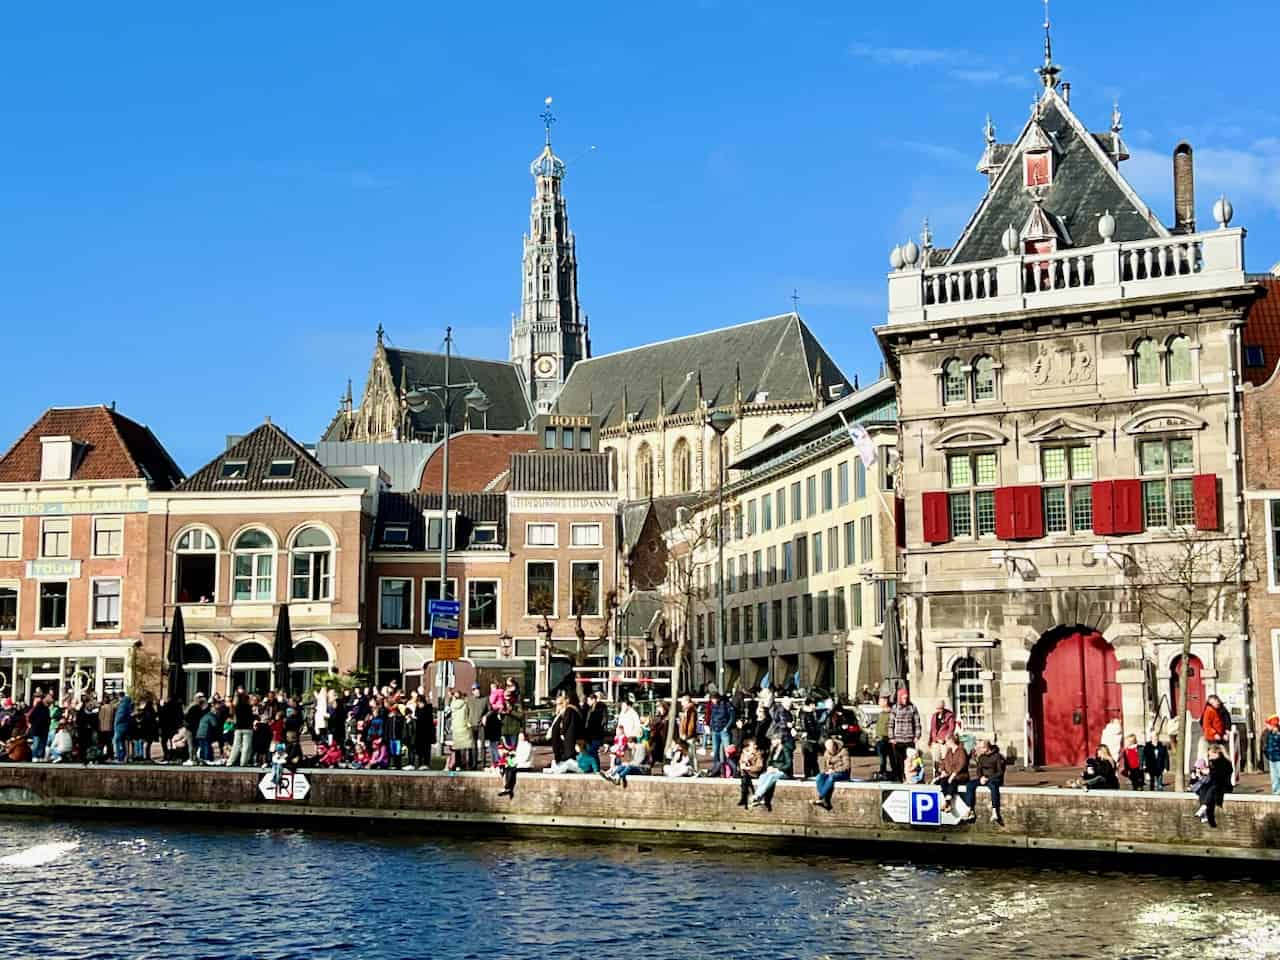 Things to see and do in Haarlem – a walking route